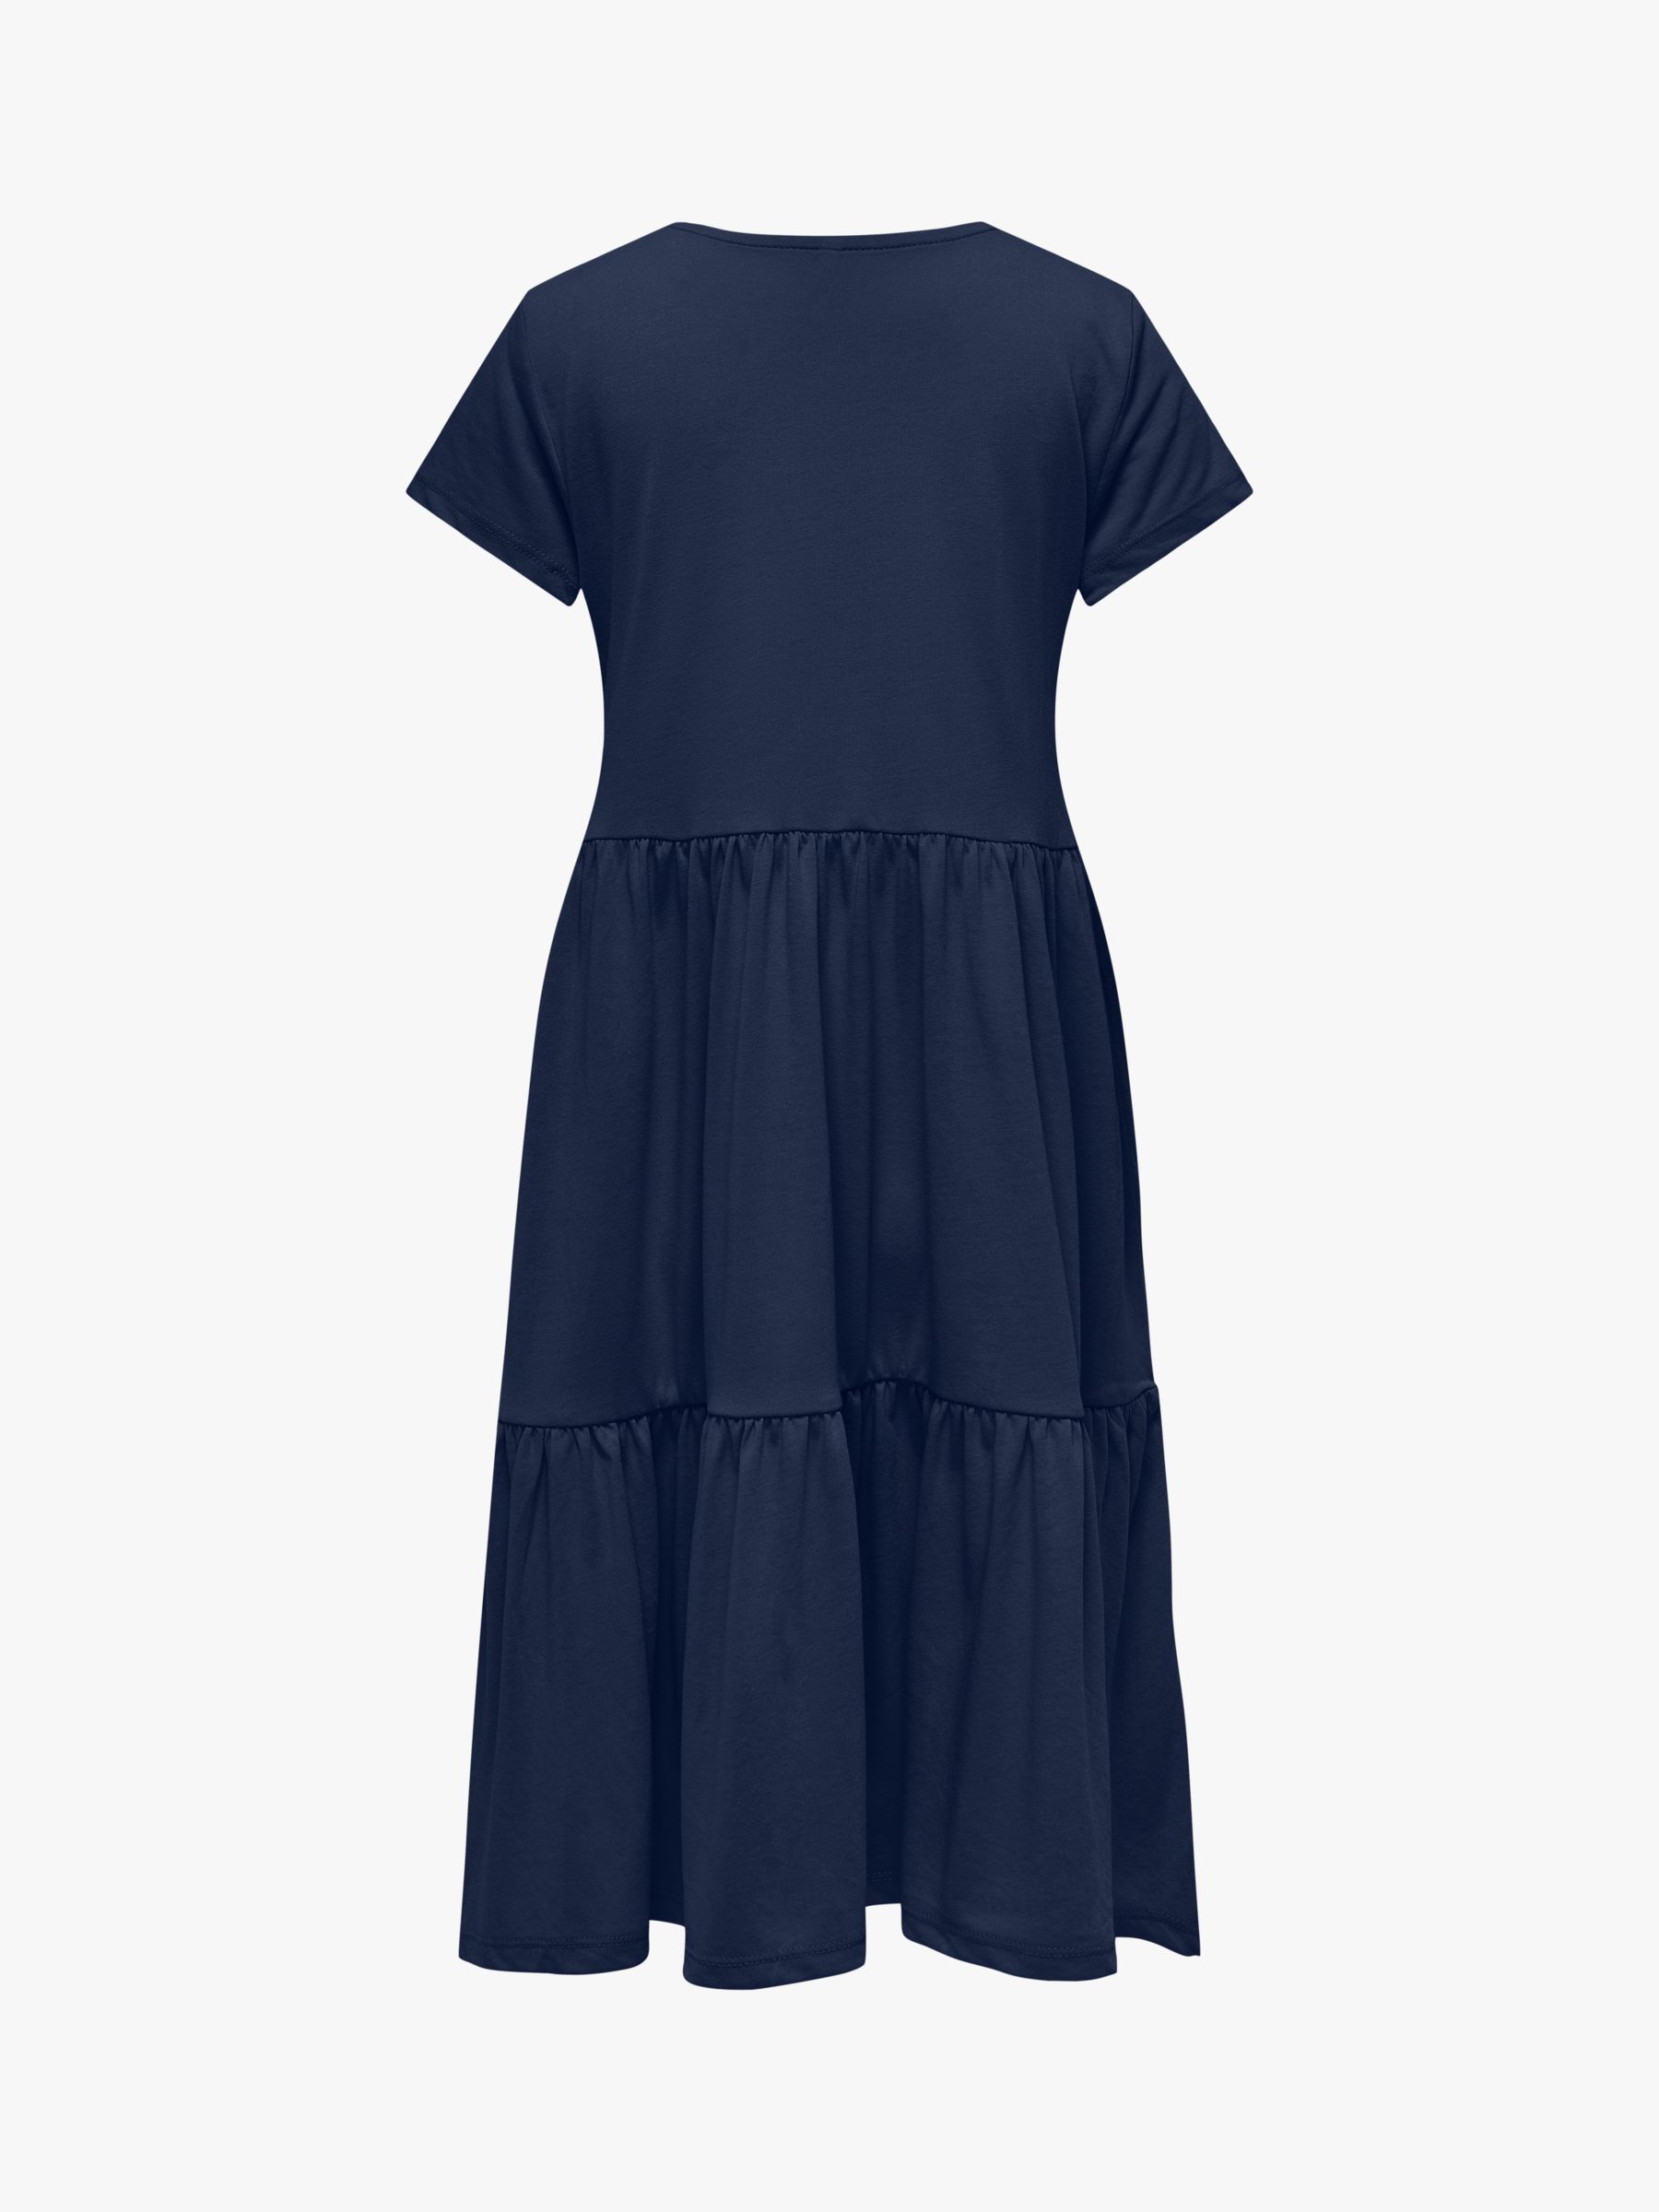 Kids ONLY Kids' Long Tiered Dress, Naval Academy, 13-14 years